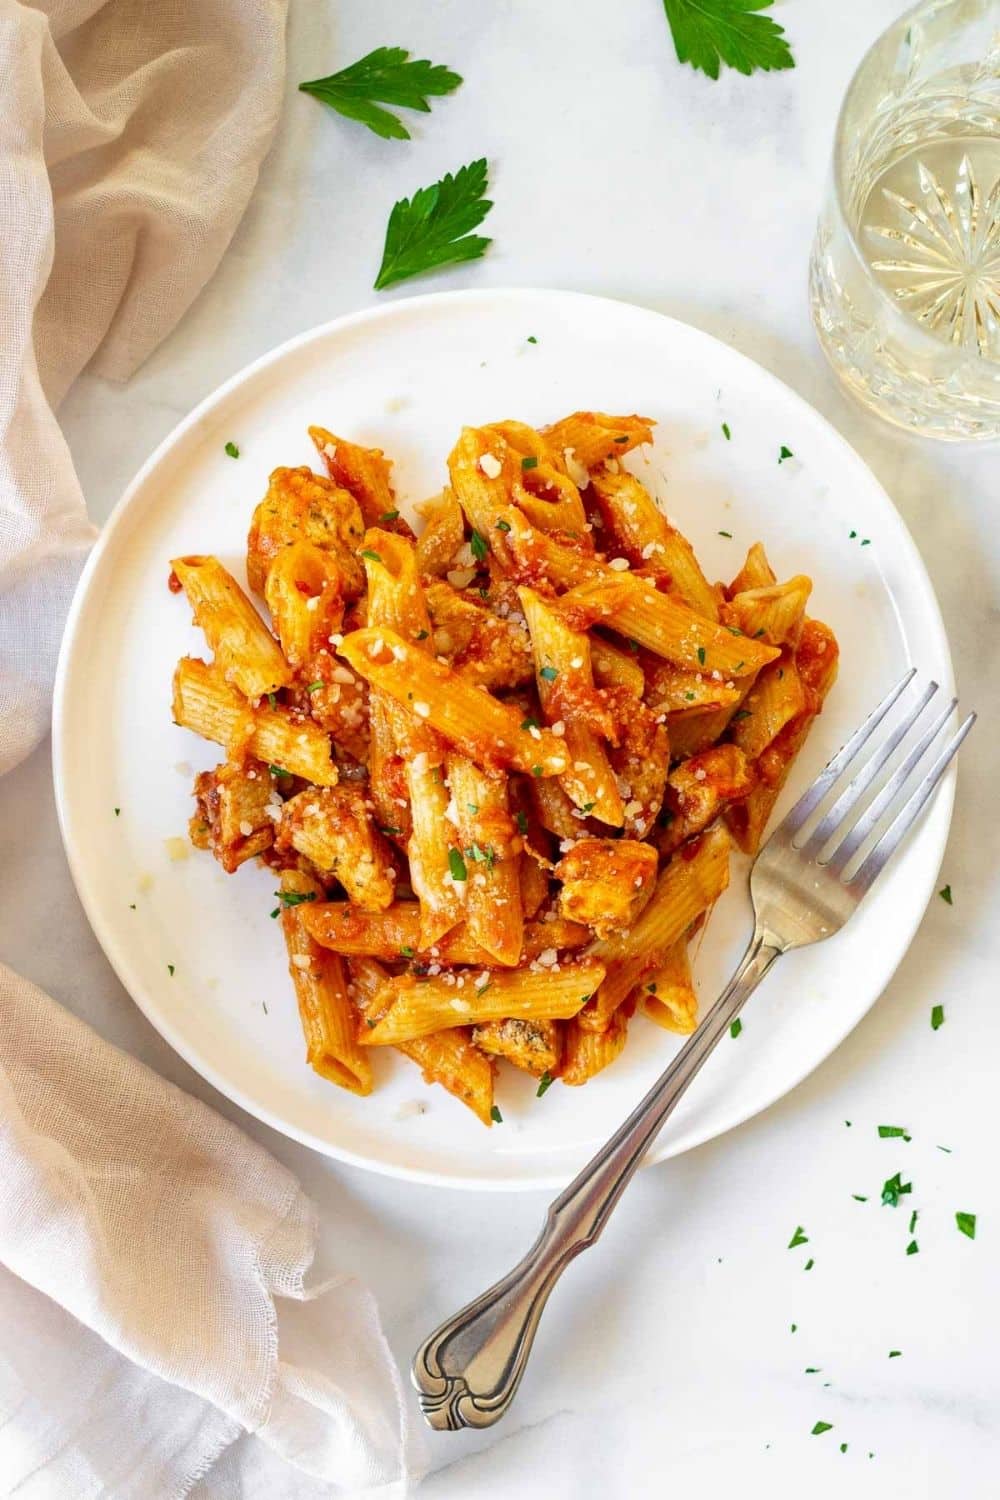 Instant pot chicken penne pasta in a white plate with a fork